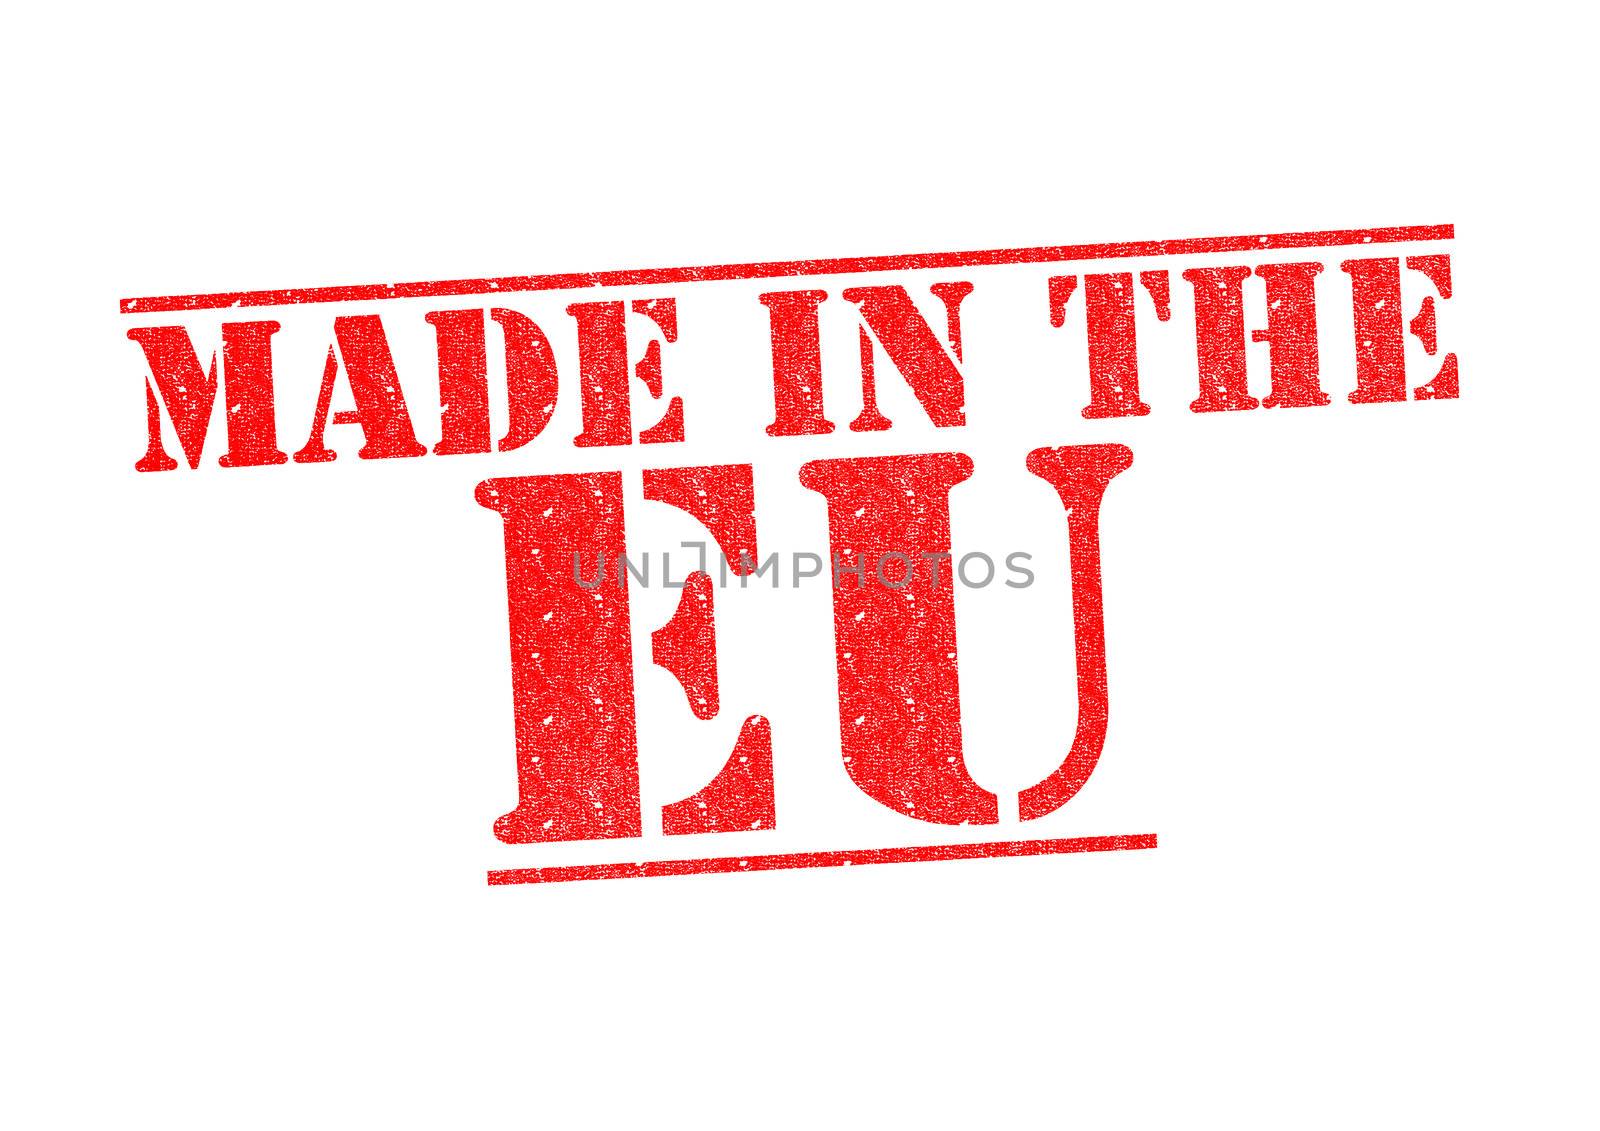 MADE IN THE EU Rubber Stamp over a white background.